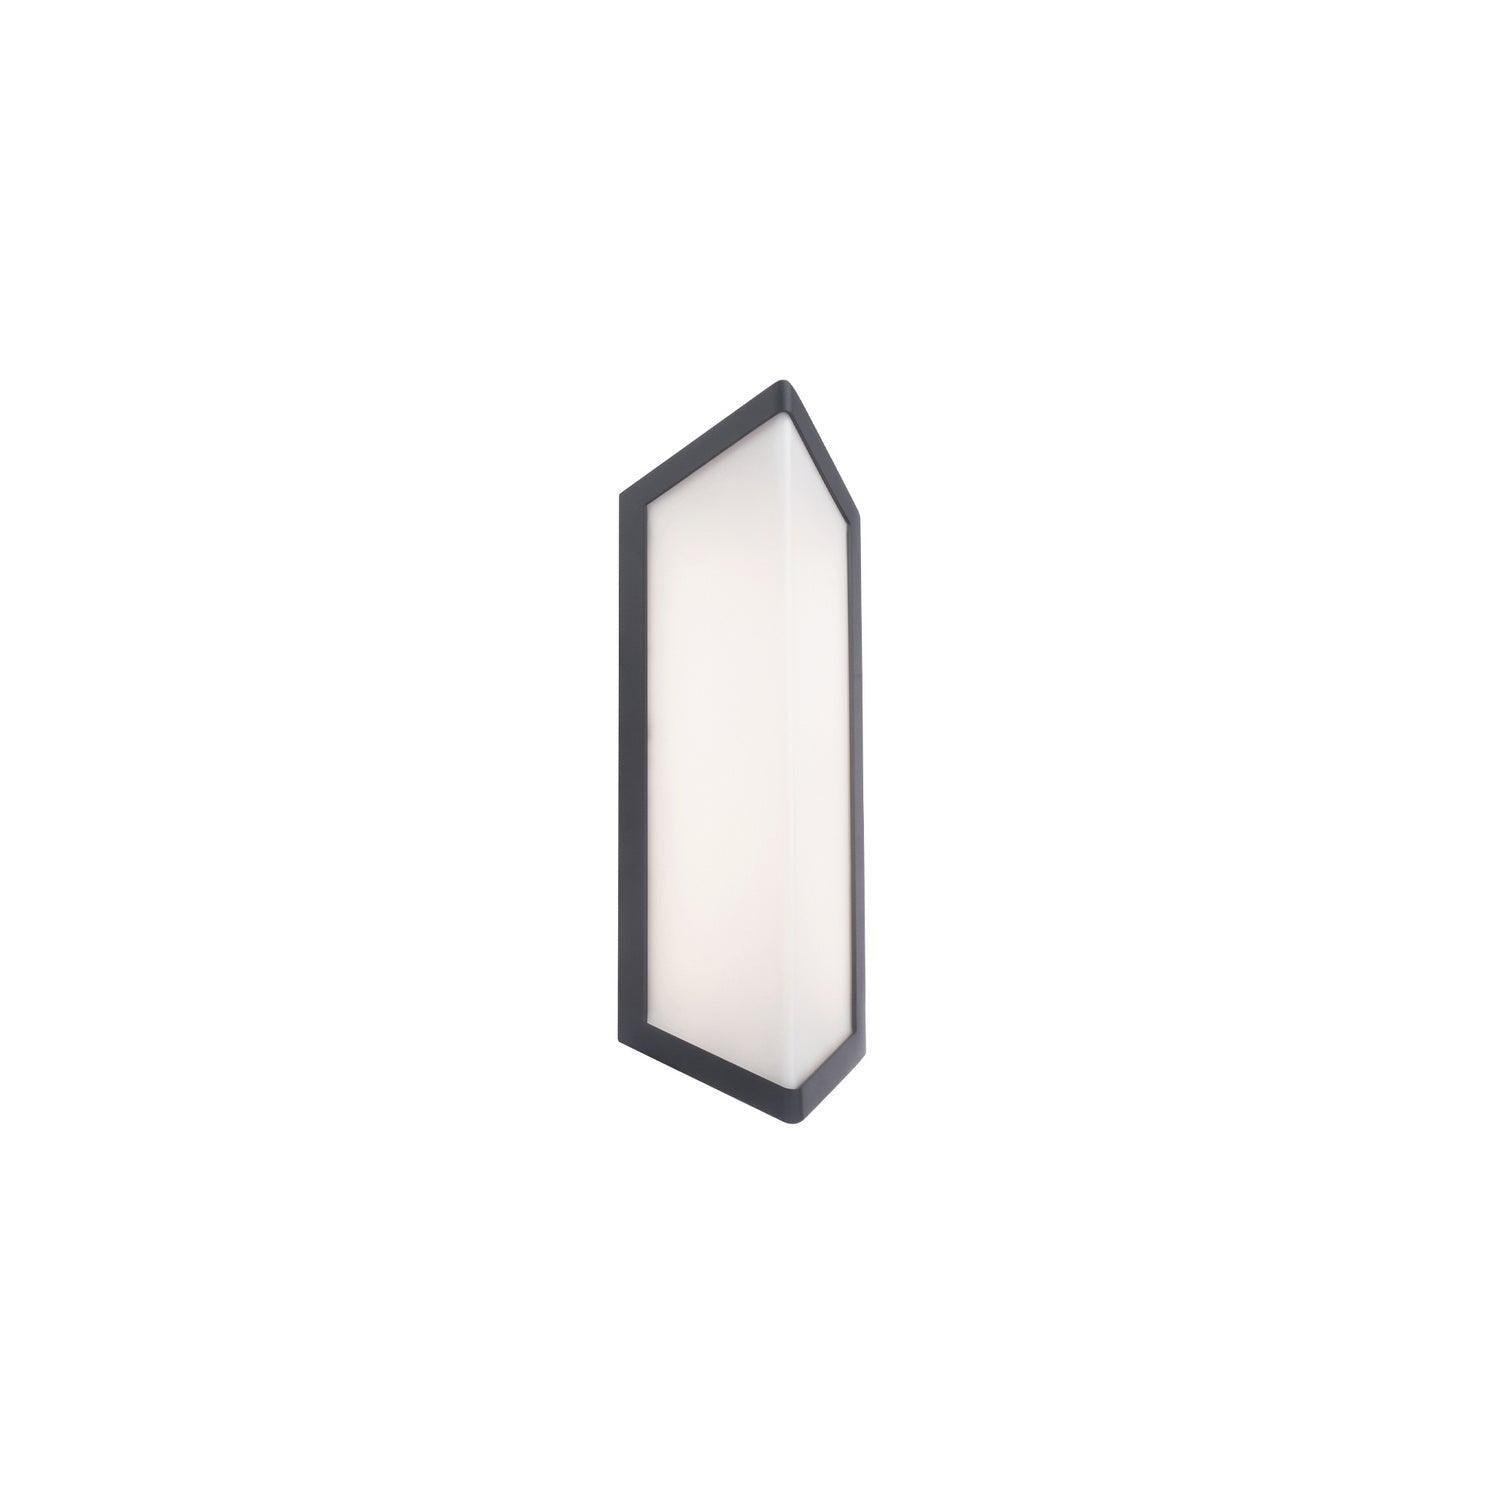 WAC Lighting - Corte LED Outdoor Wall Sconce - WS-W15216-30-BK | Montreal Lighting & Hardware